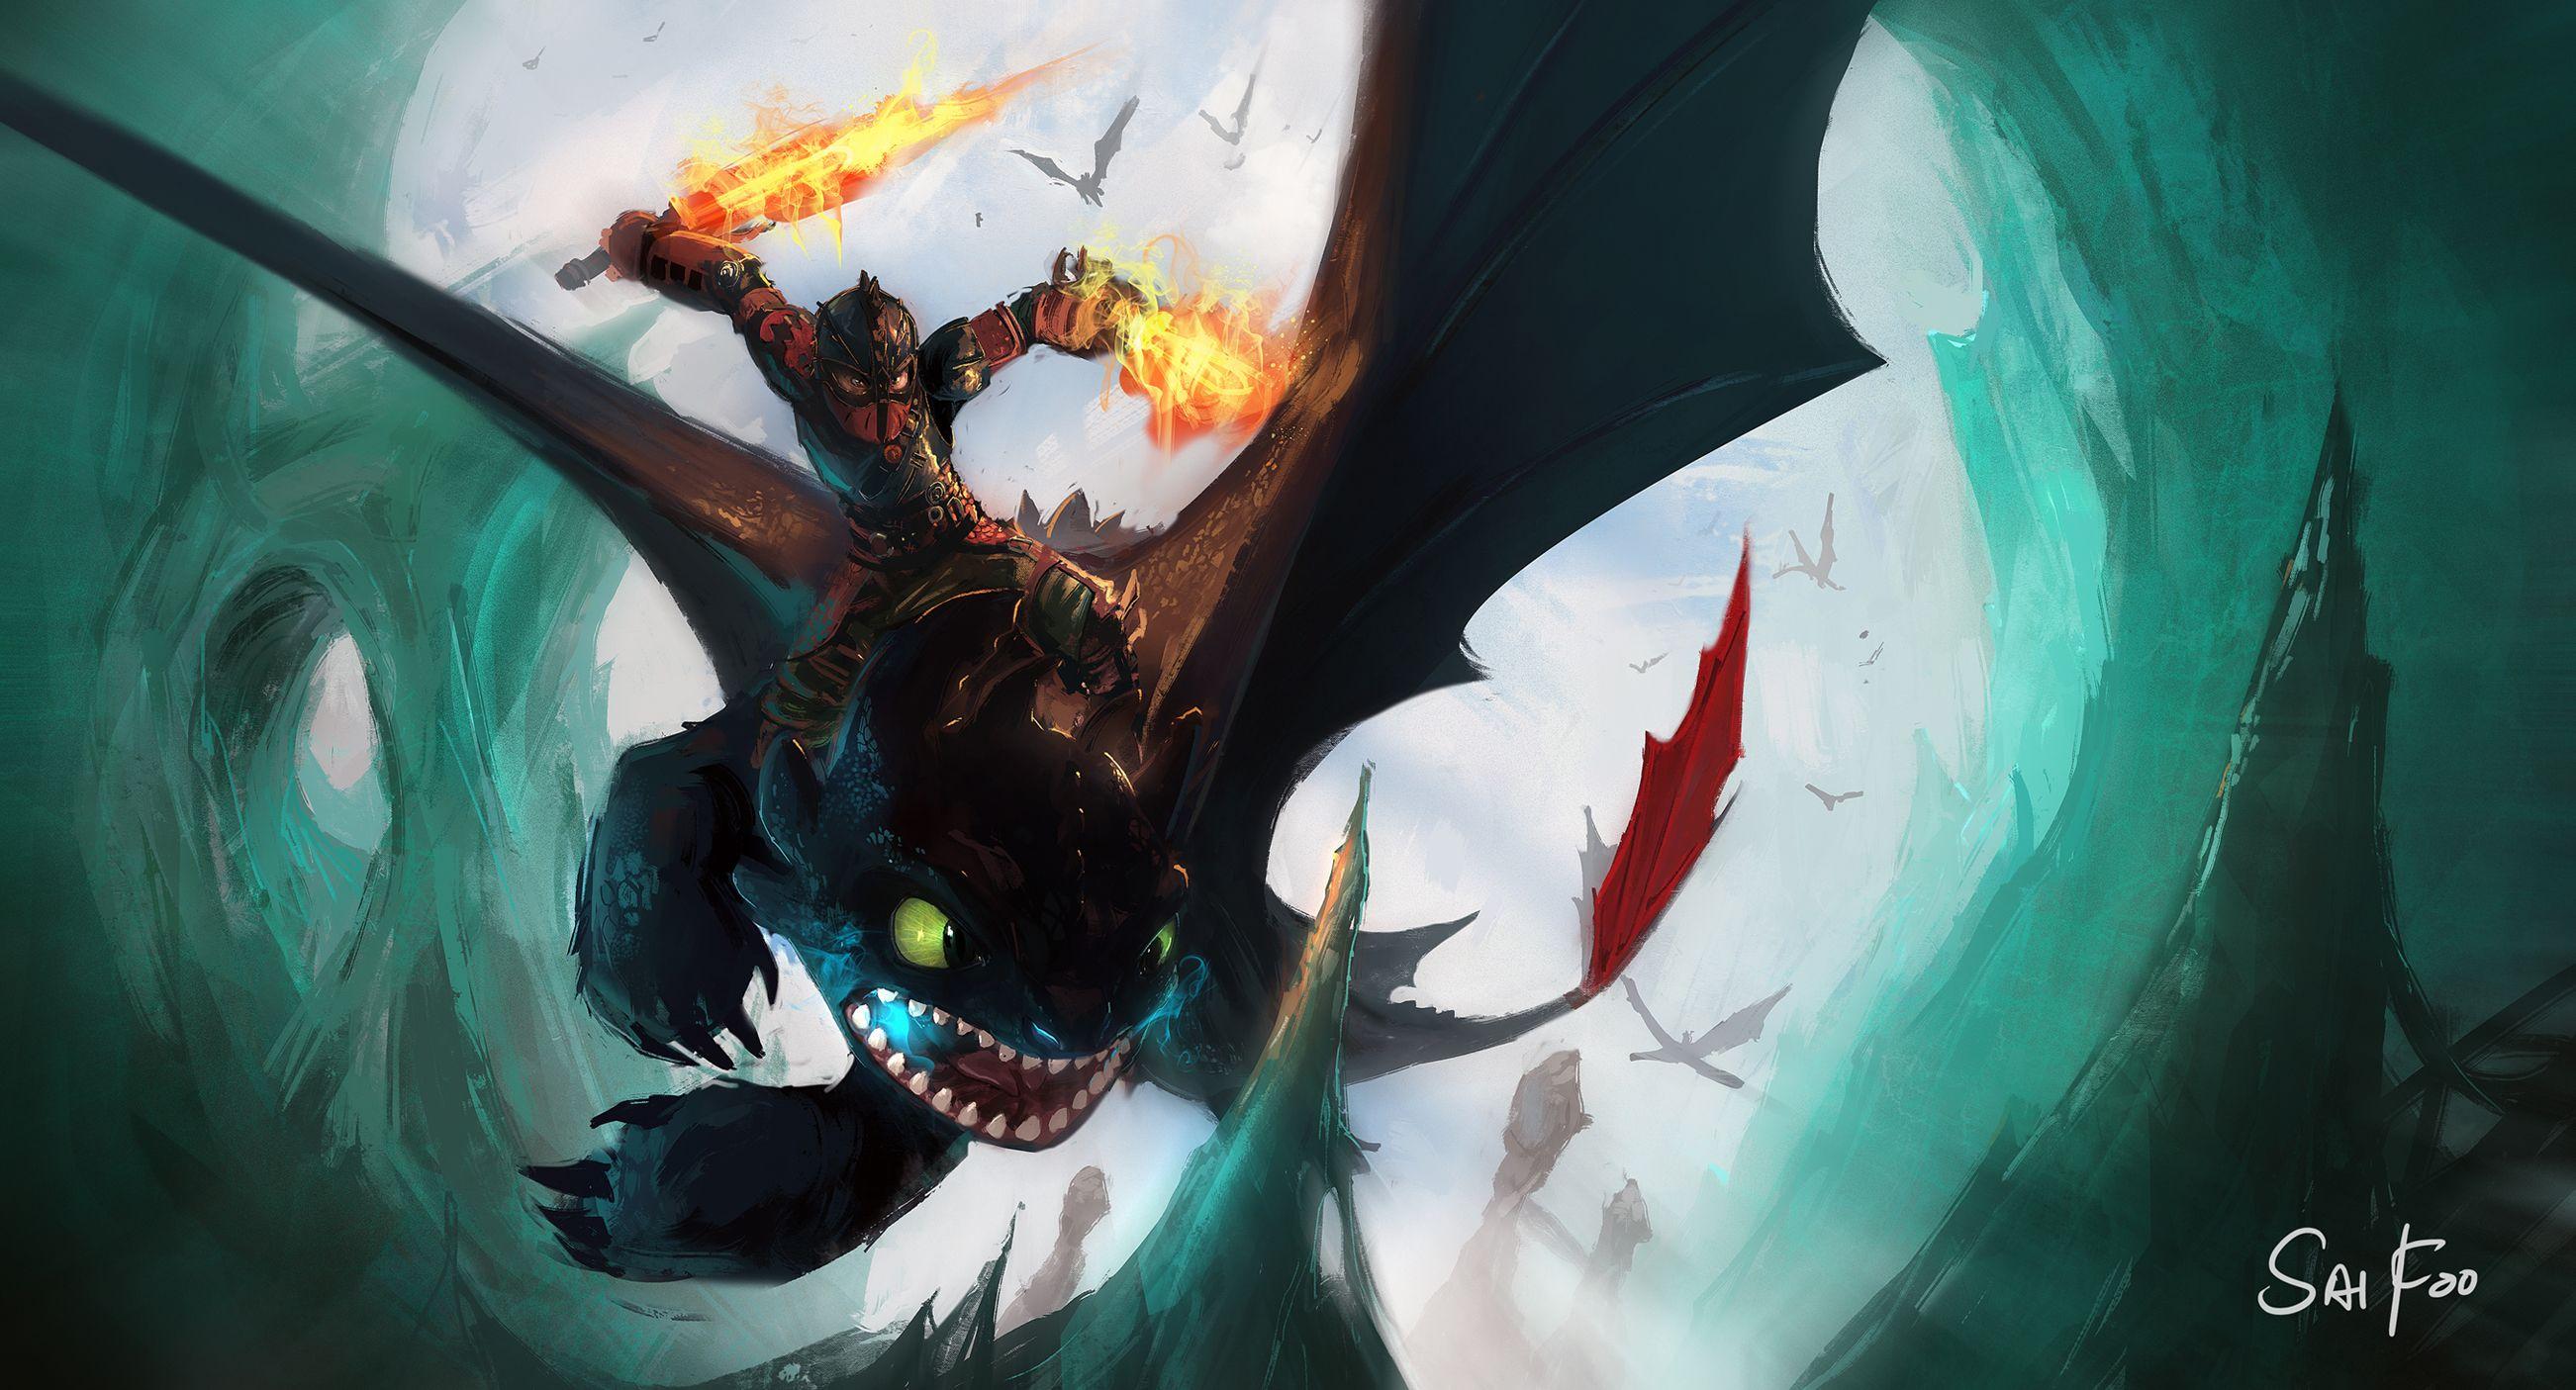 Toothless (How to Train Your Dragon) HD Wallpaper. Background